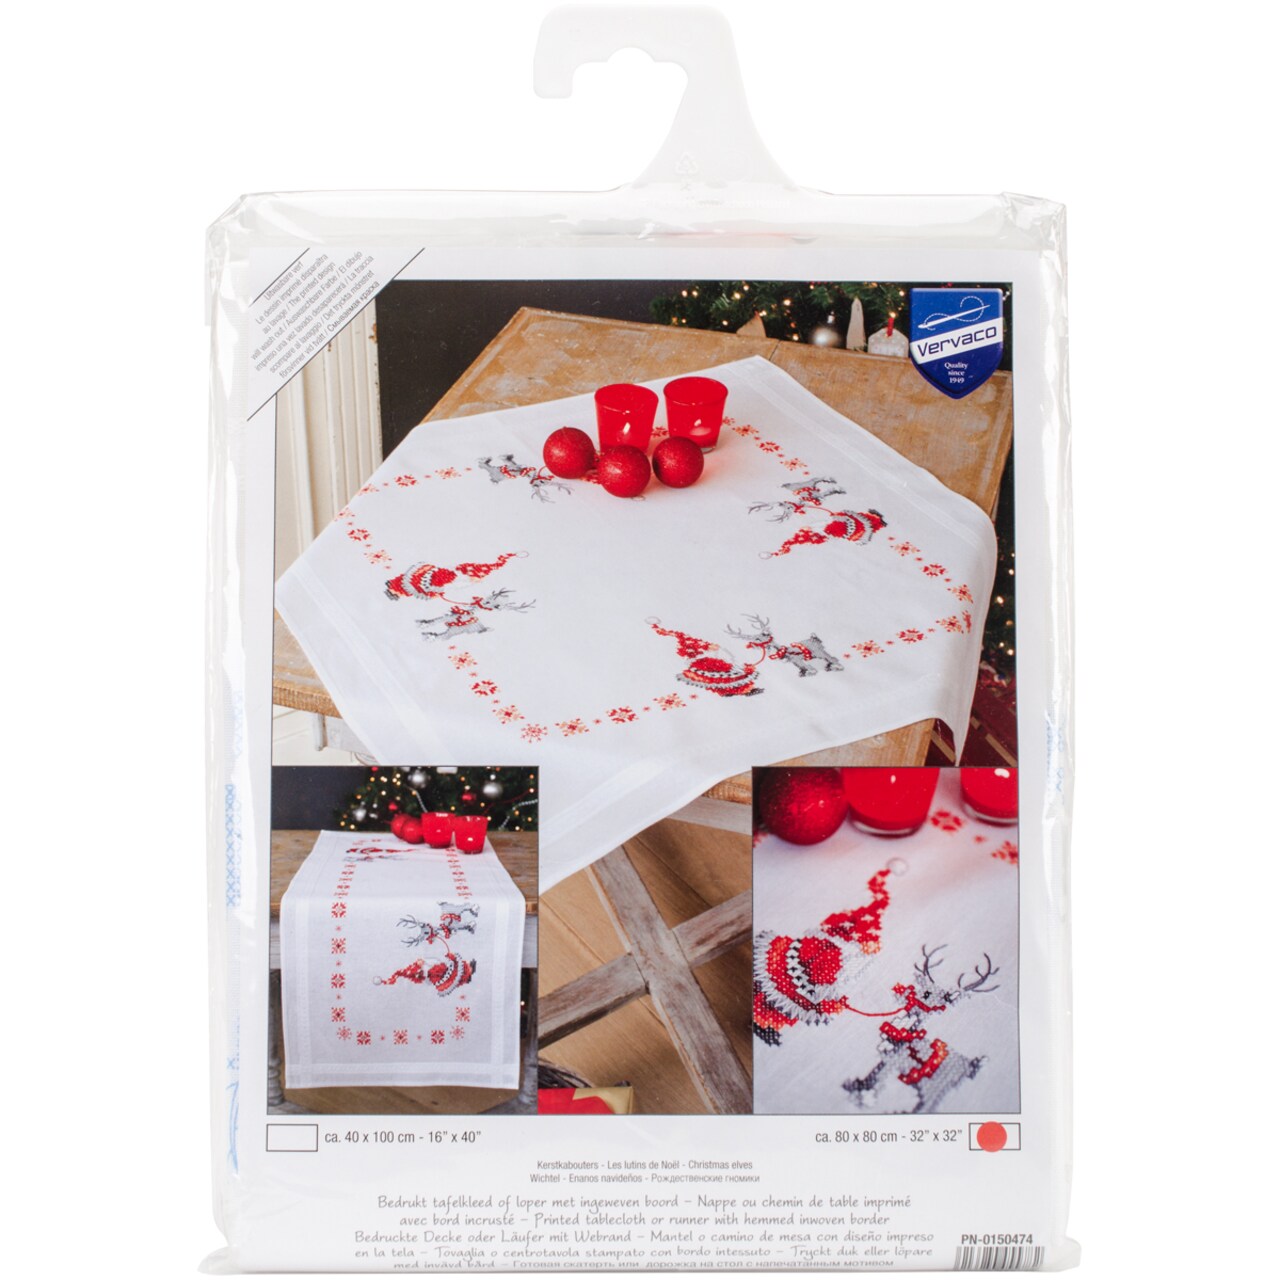 Vervaco Stamped Tablecloth Cross Stitch Kit 32X32-Christmas